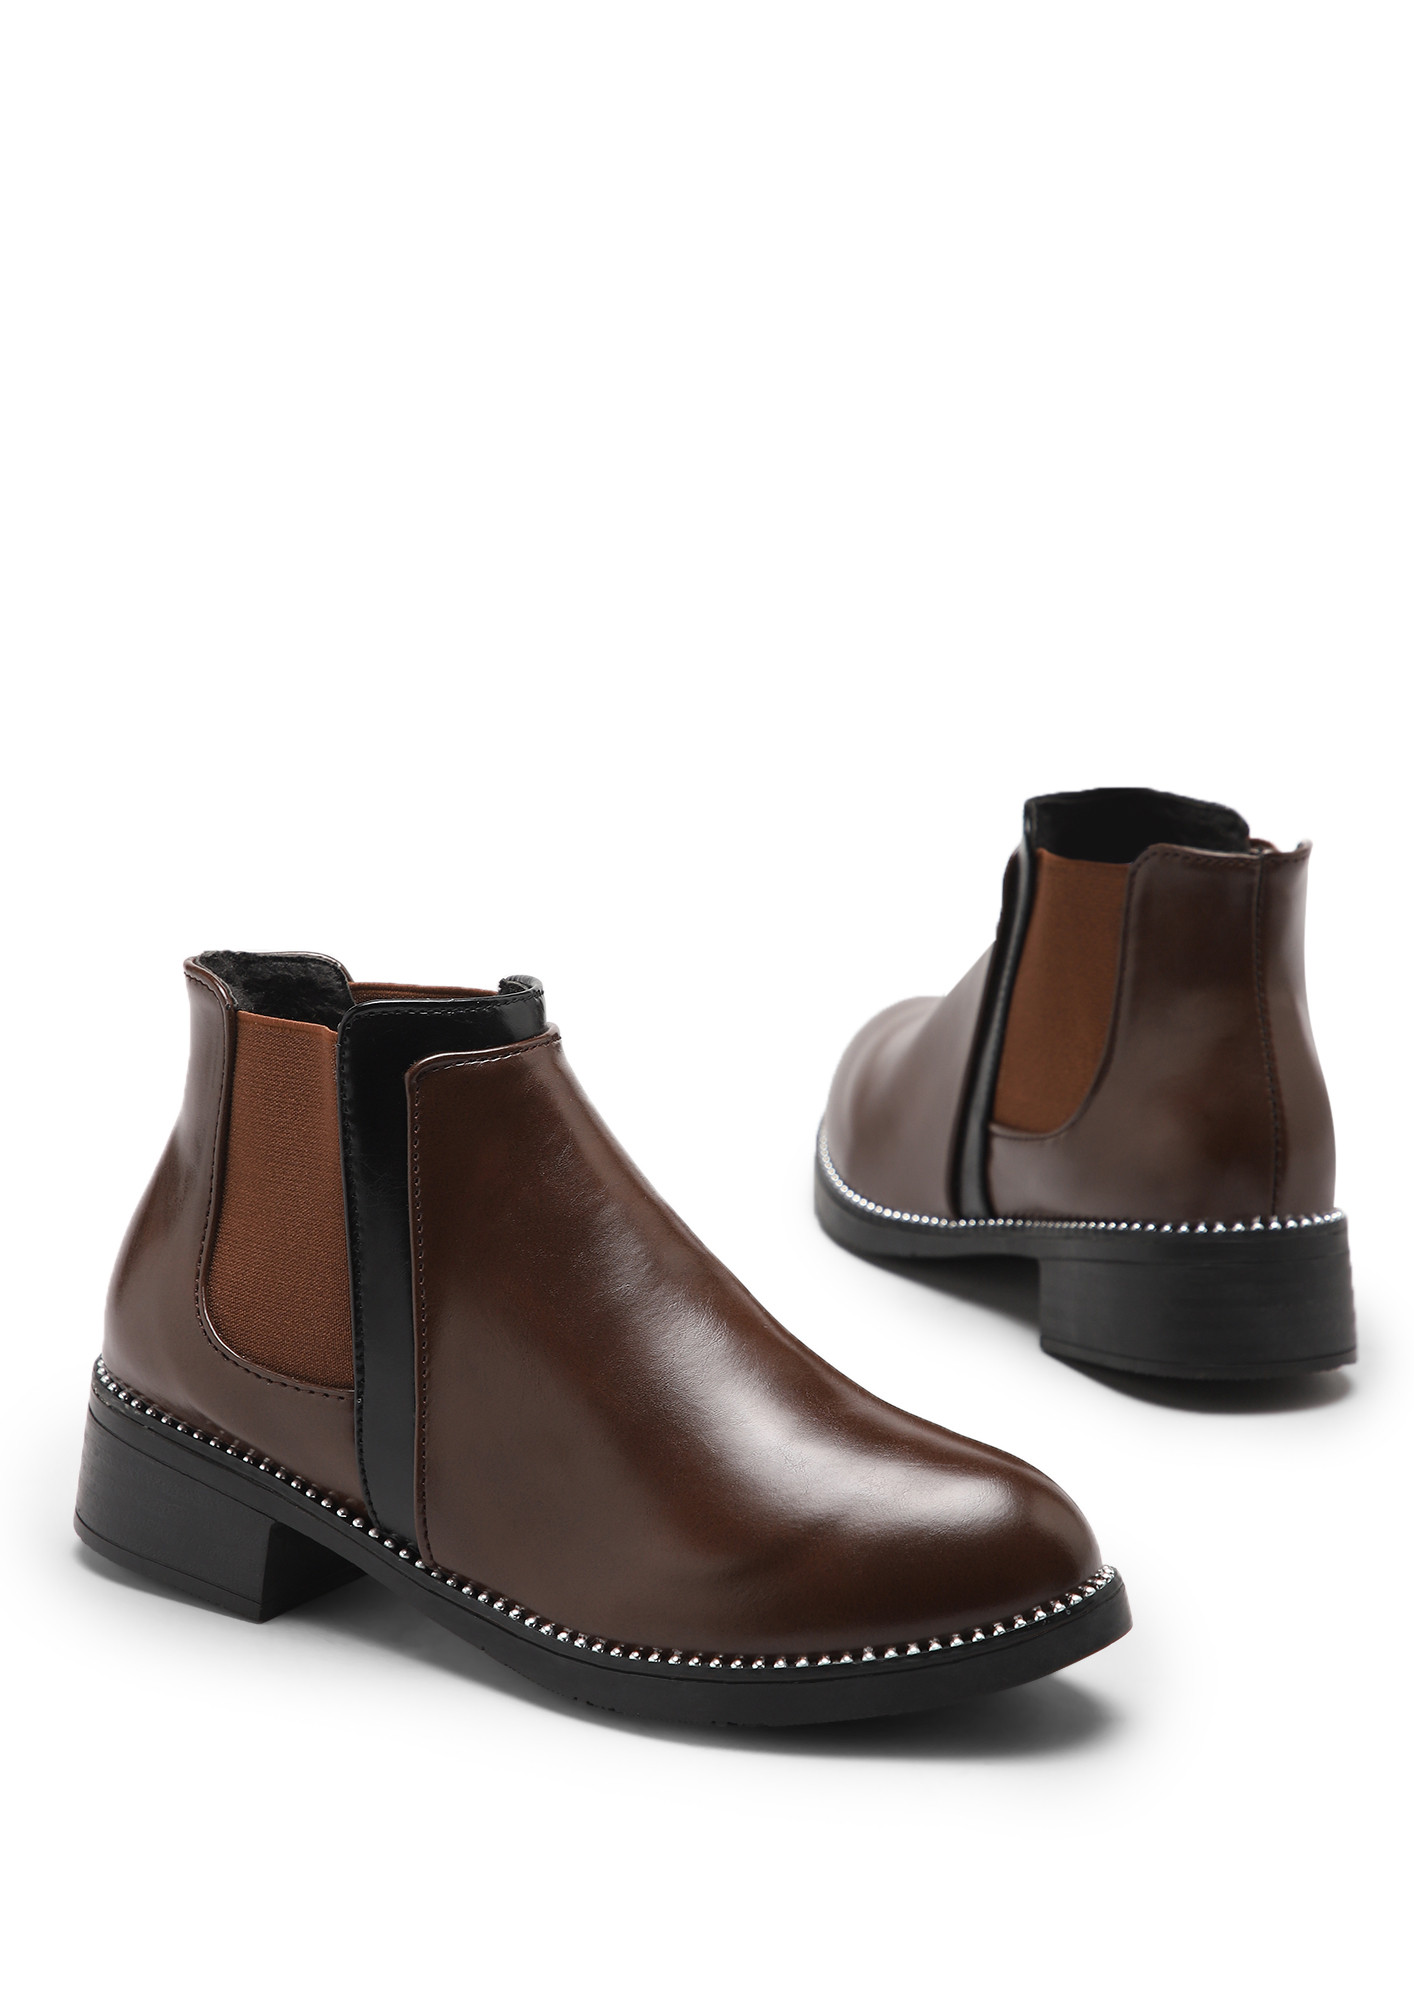 DAPPERFIED FEET CHOCOLATE BROWN CHELSEA BOOTS